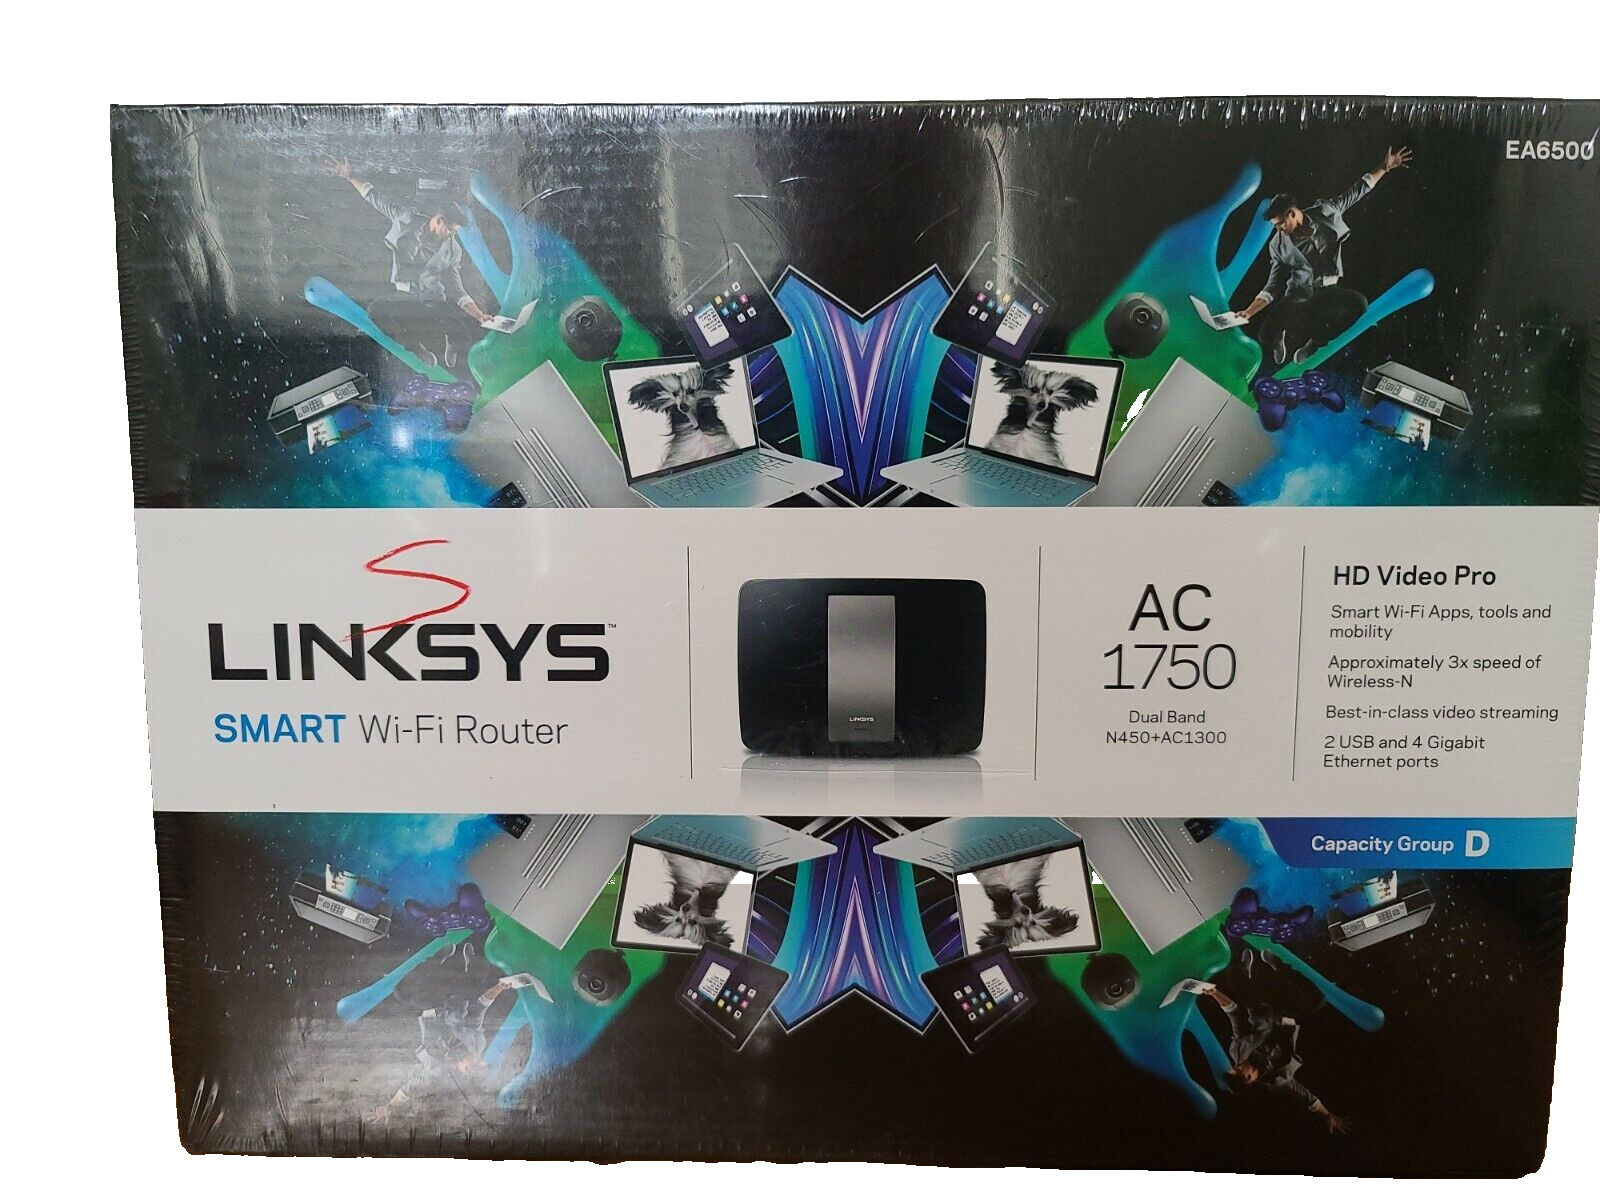 Linksys Smart Wi-Fi Router AC 1750 EA6500 New in Sealed Box